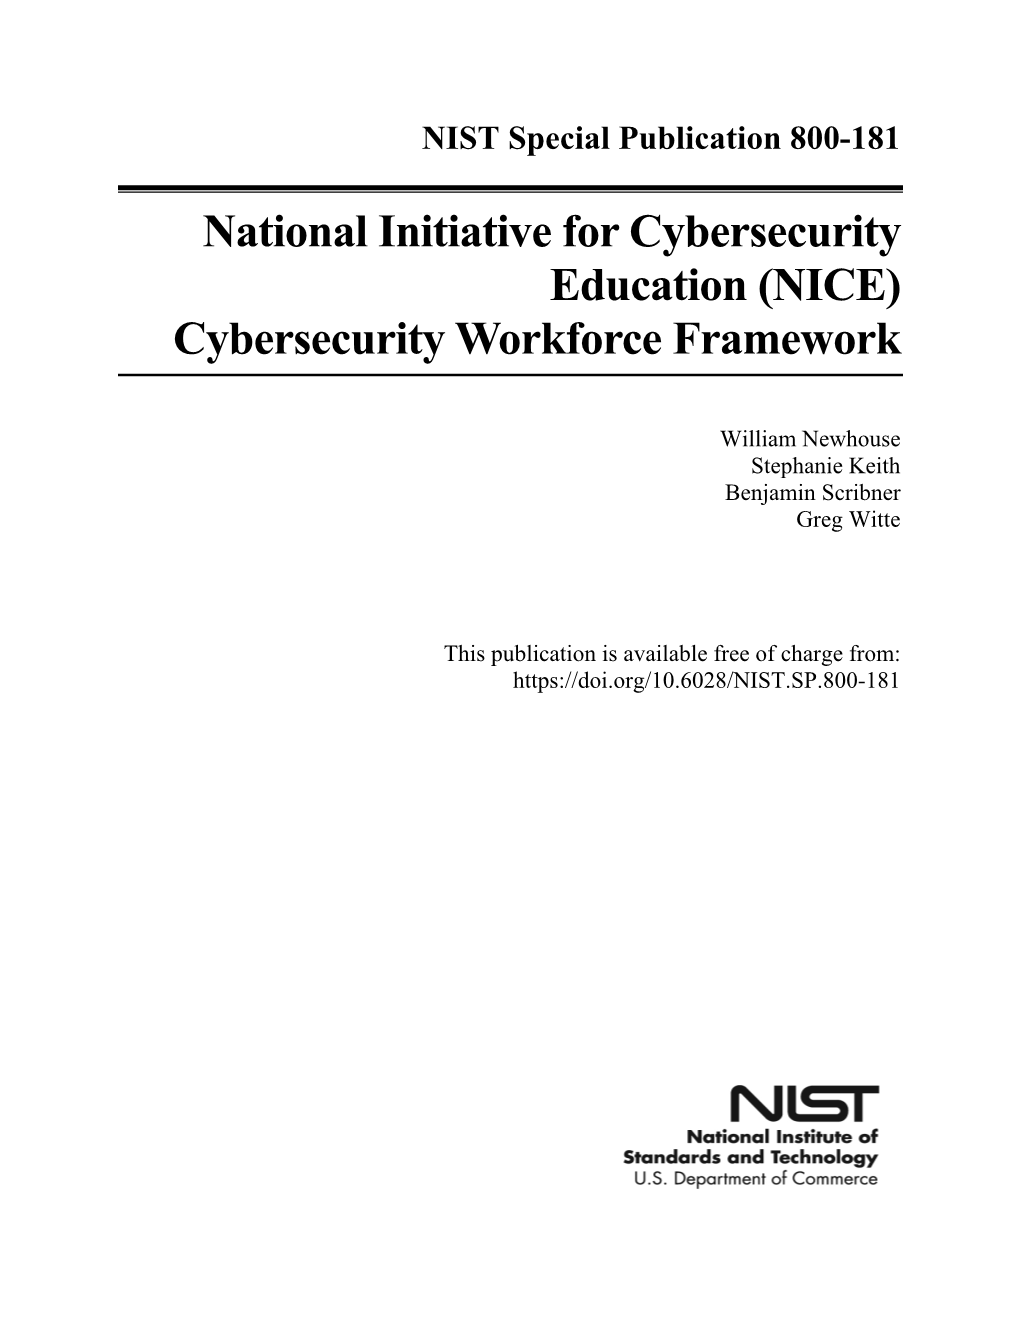 National Initiative for Cybersecurity Education (NICE) Cybersecurity Workforce Framework